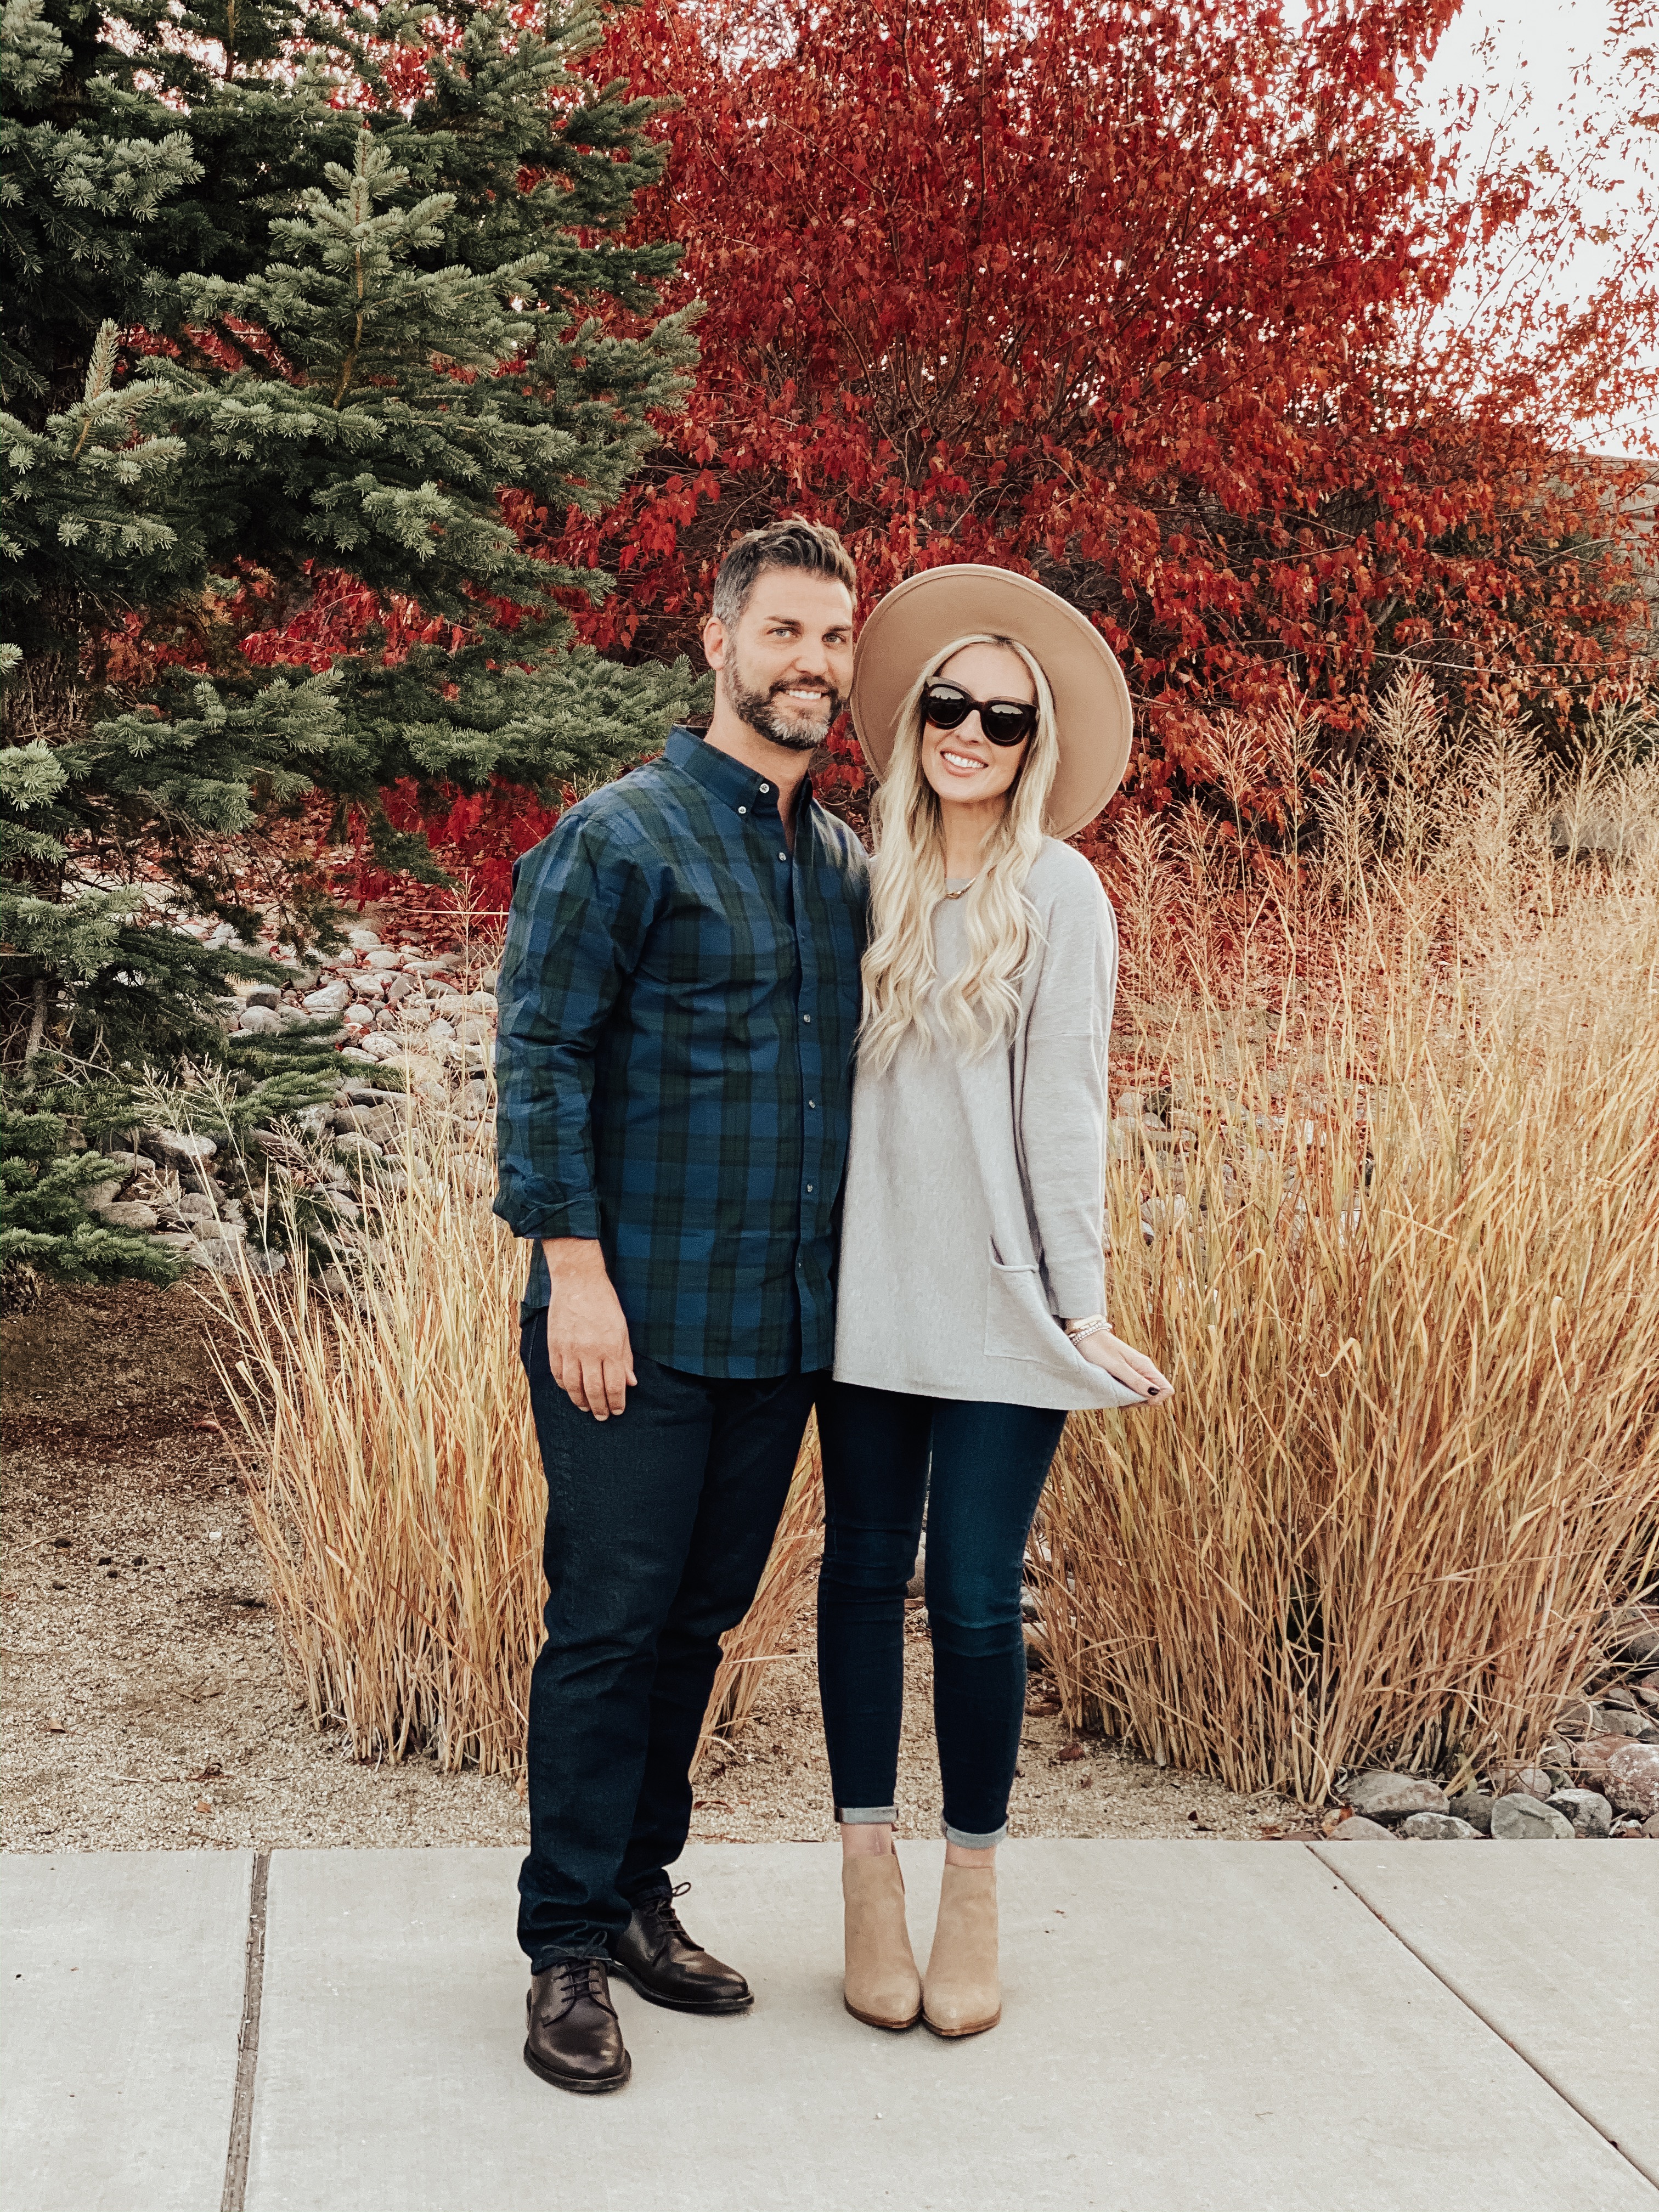 Reno Bloggers Ashley Zeal and Emily Wieczorek borrow their husbands for a blog post to show off their date night style with Bonobos.